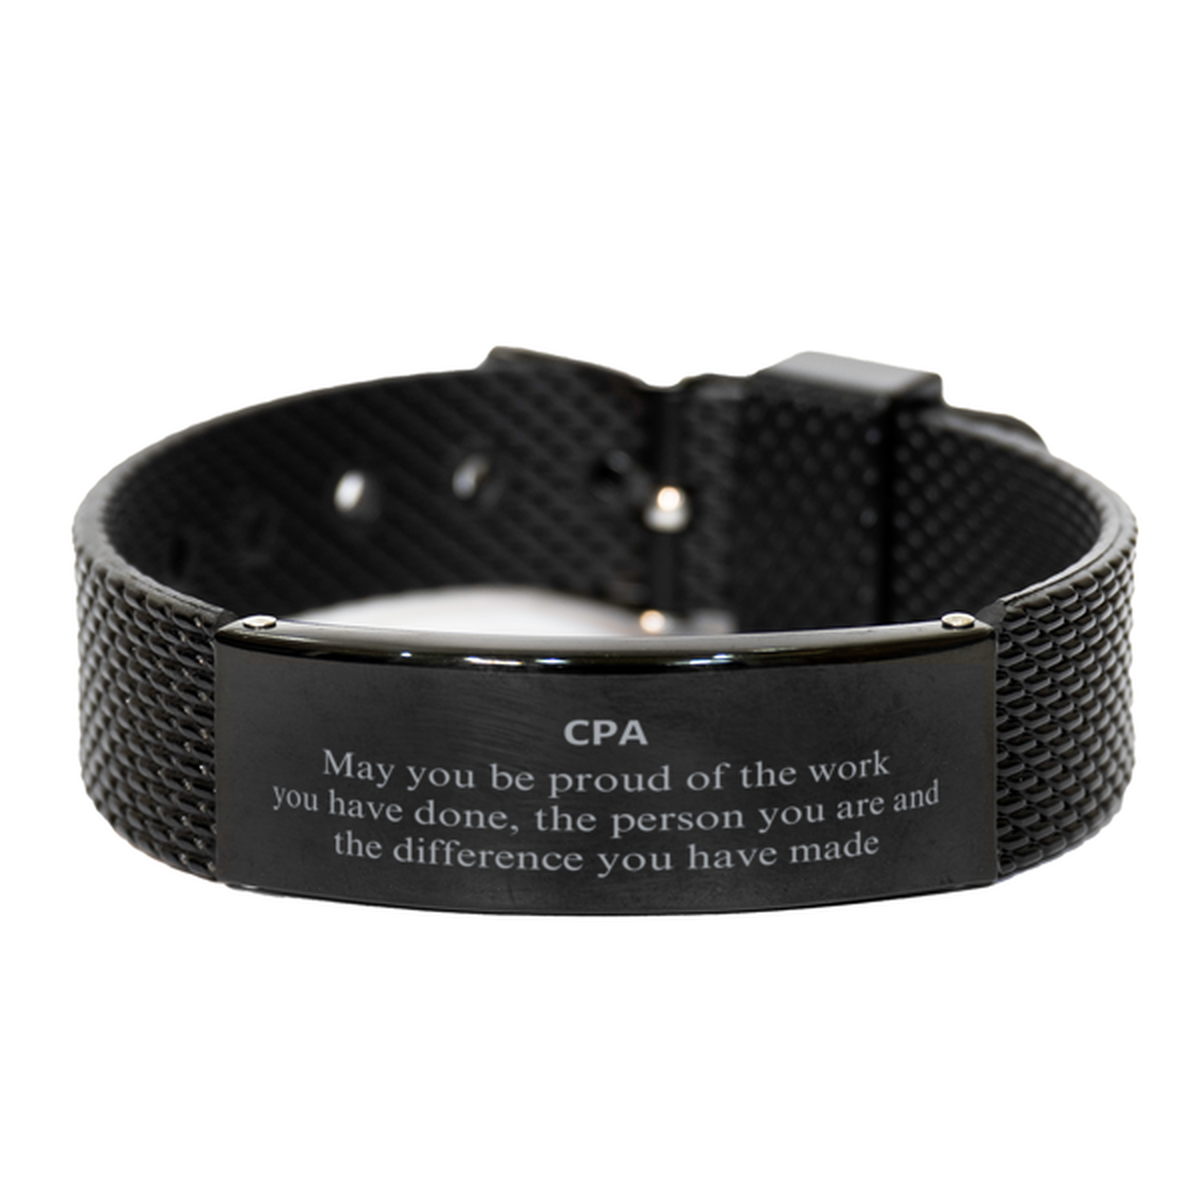 CPA May you be proud of the work you have done, Retirement CPA Black Shark Mesh Bracelet for Colleague Appreciation Gifts Amazing for CPA